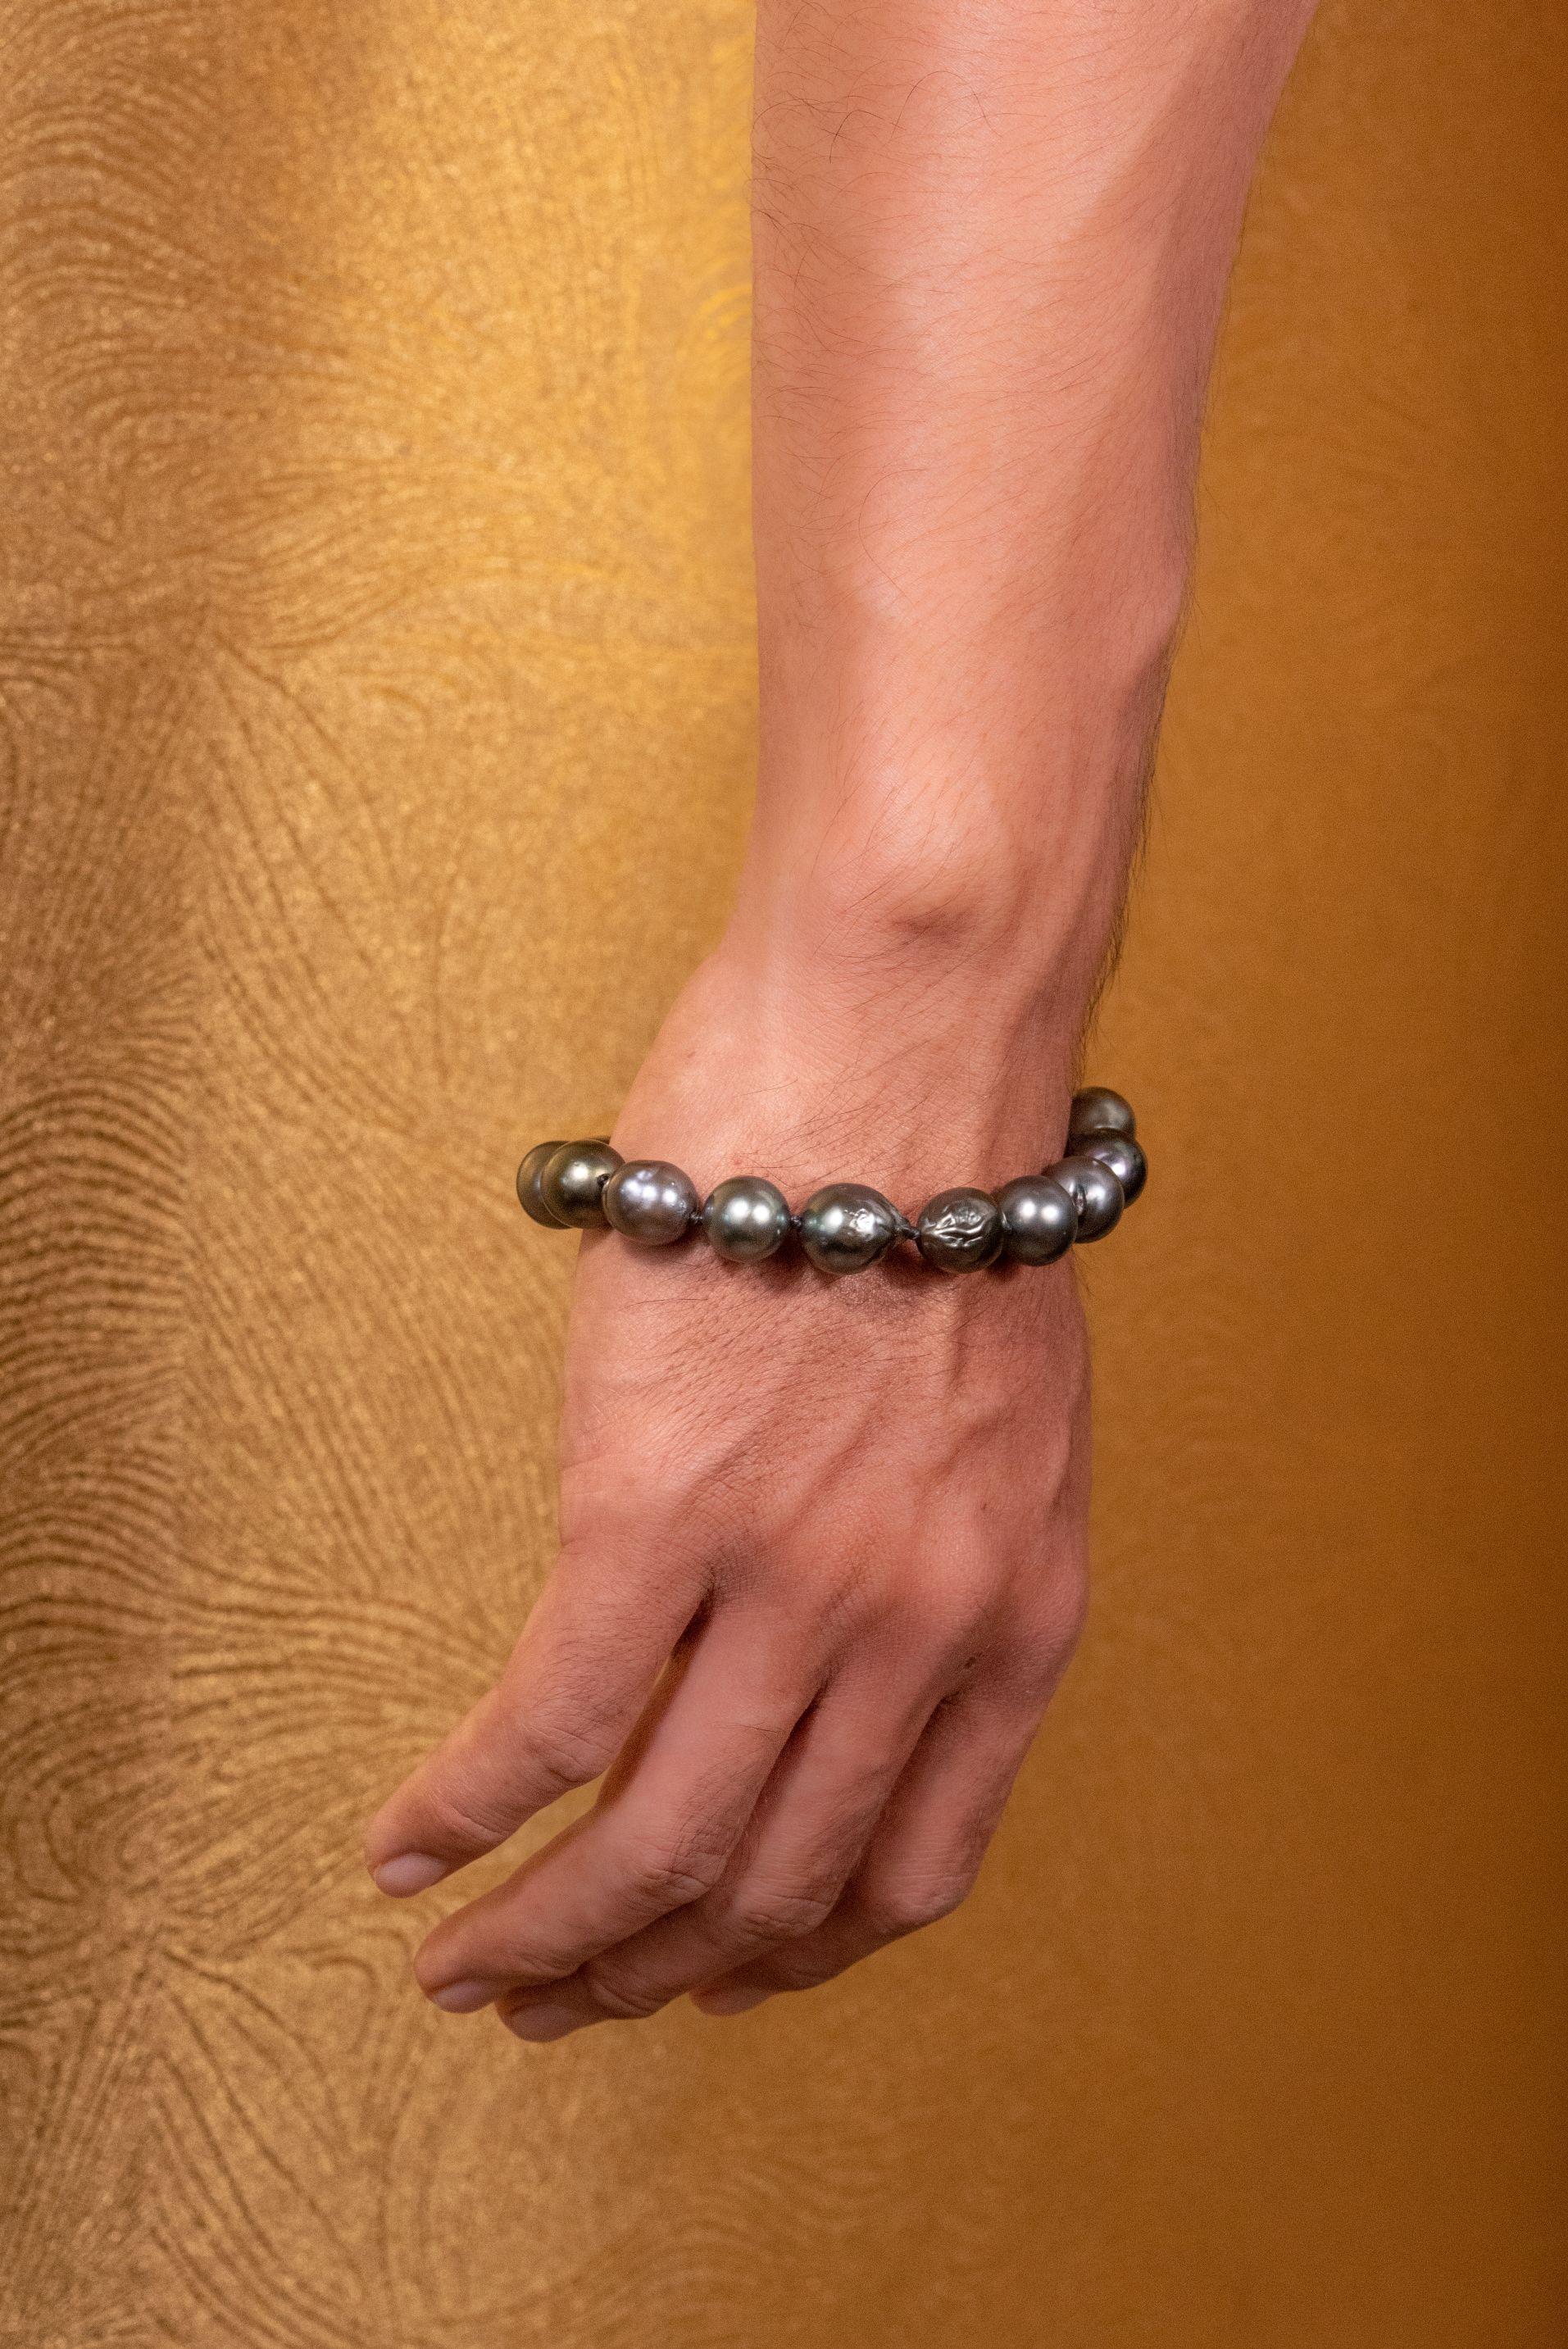 Complete any outfit with our simple yet stunning Tahitian pearl bracelet. Set on a sterling silver chain, this bracelet features iridescent black Tahitian pearls for an understated, timeless look. 

Size: 24.5cm long
Pearl size: 12-13.5mm
Weight: